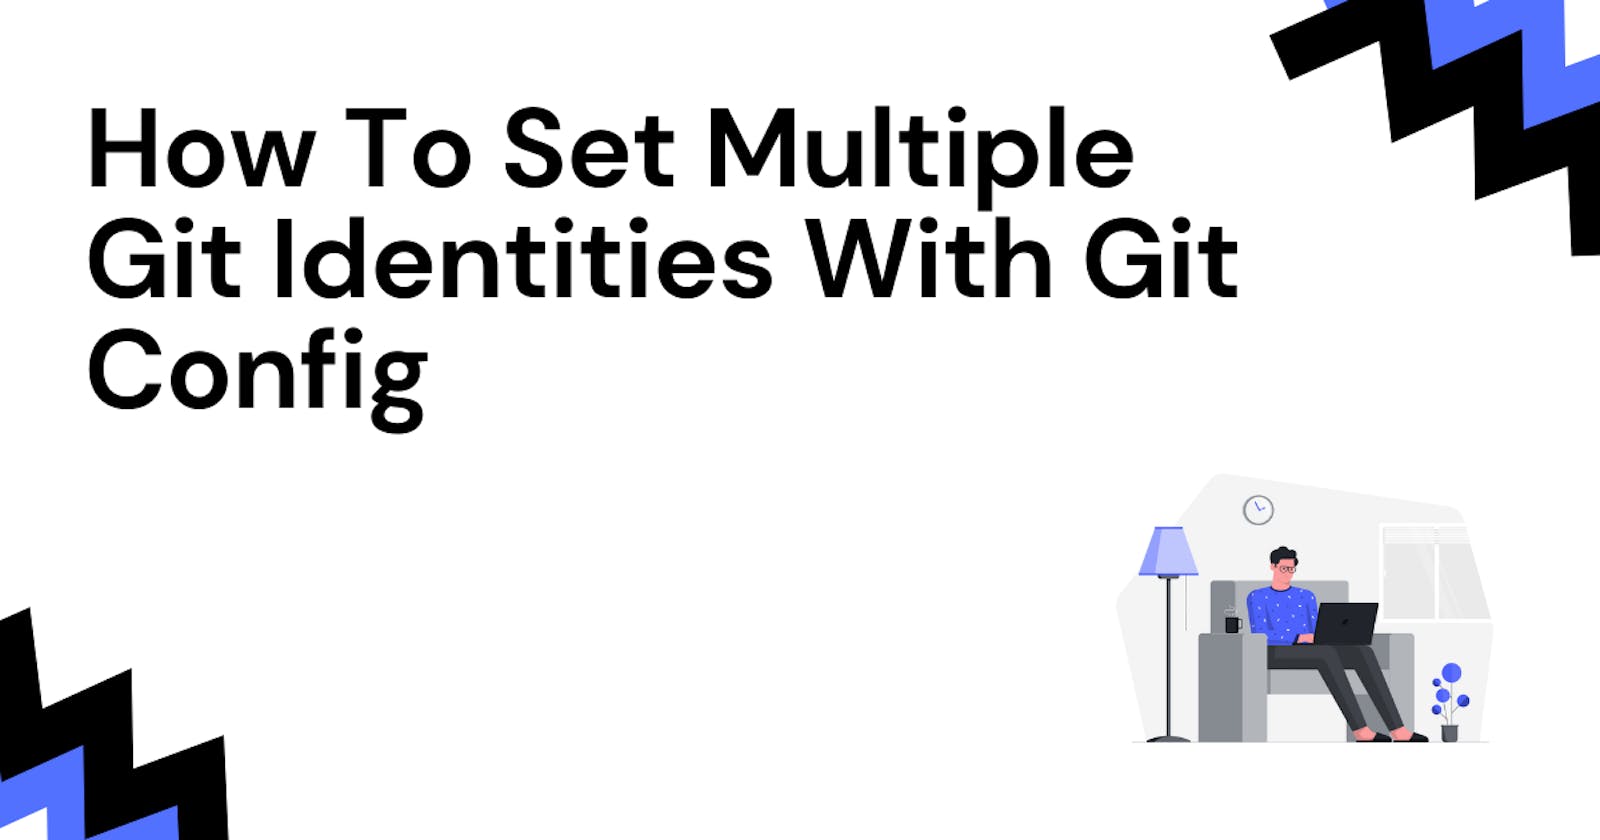 How To Set Multiple Git Identities With Git Config